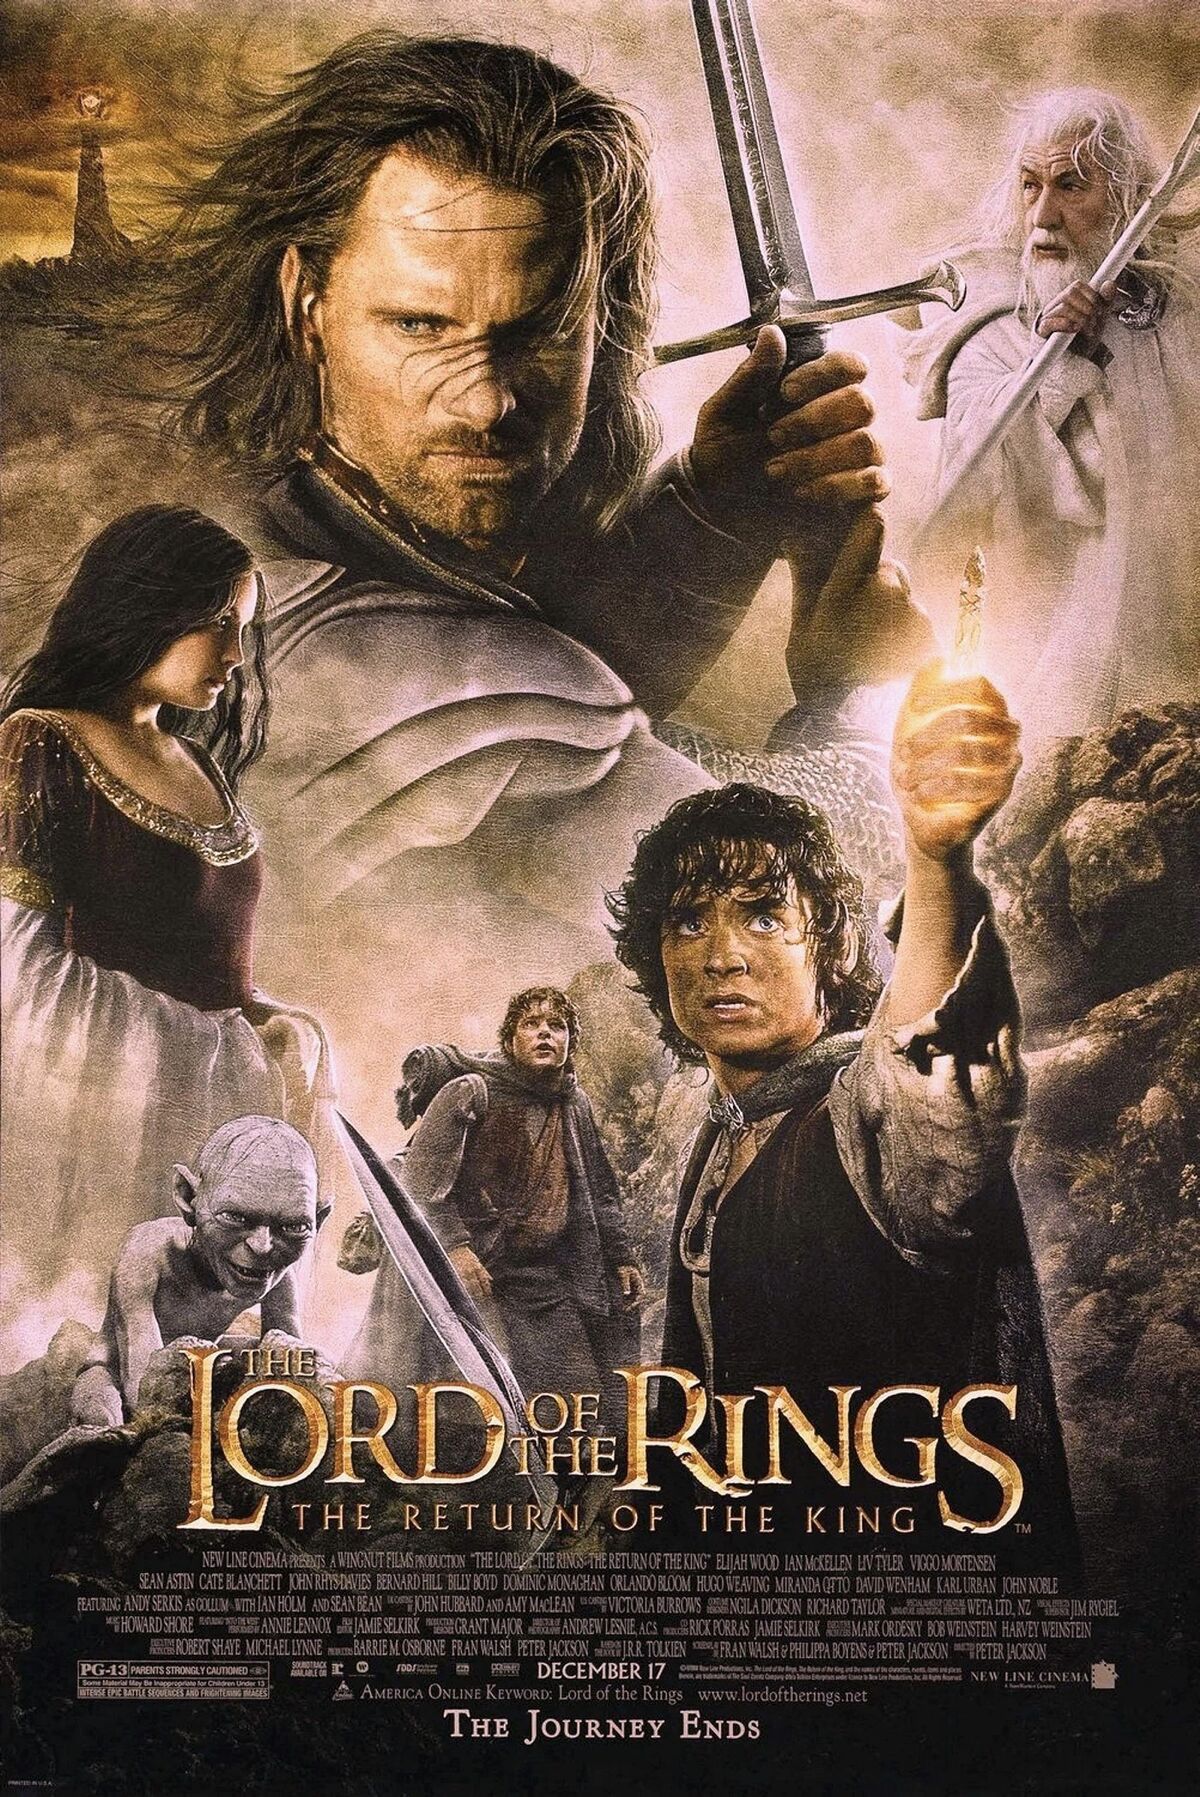 The Lord of the Rings Extended Edition, The One Wiki to Rule Them All